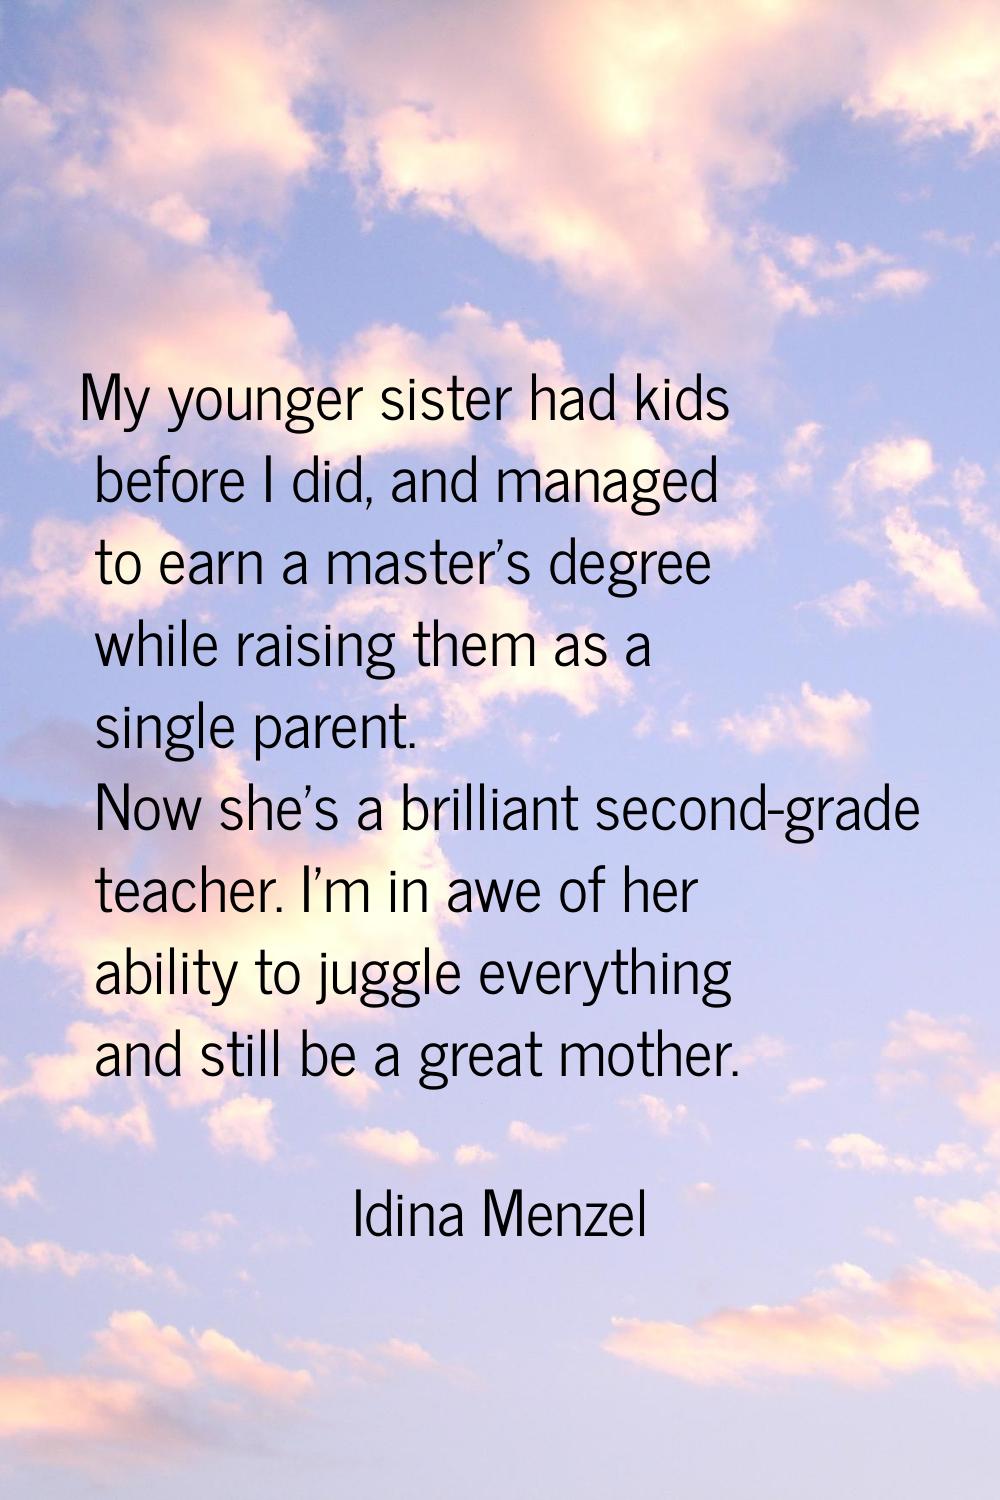 My younger sister had kids before I did, and managed to earn a master's degree while raising them a